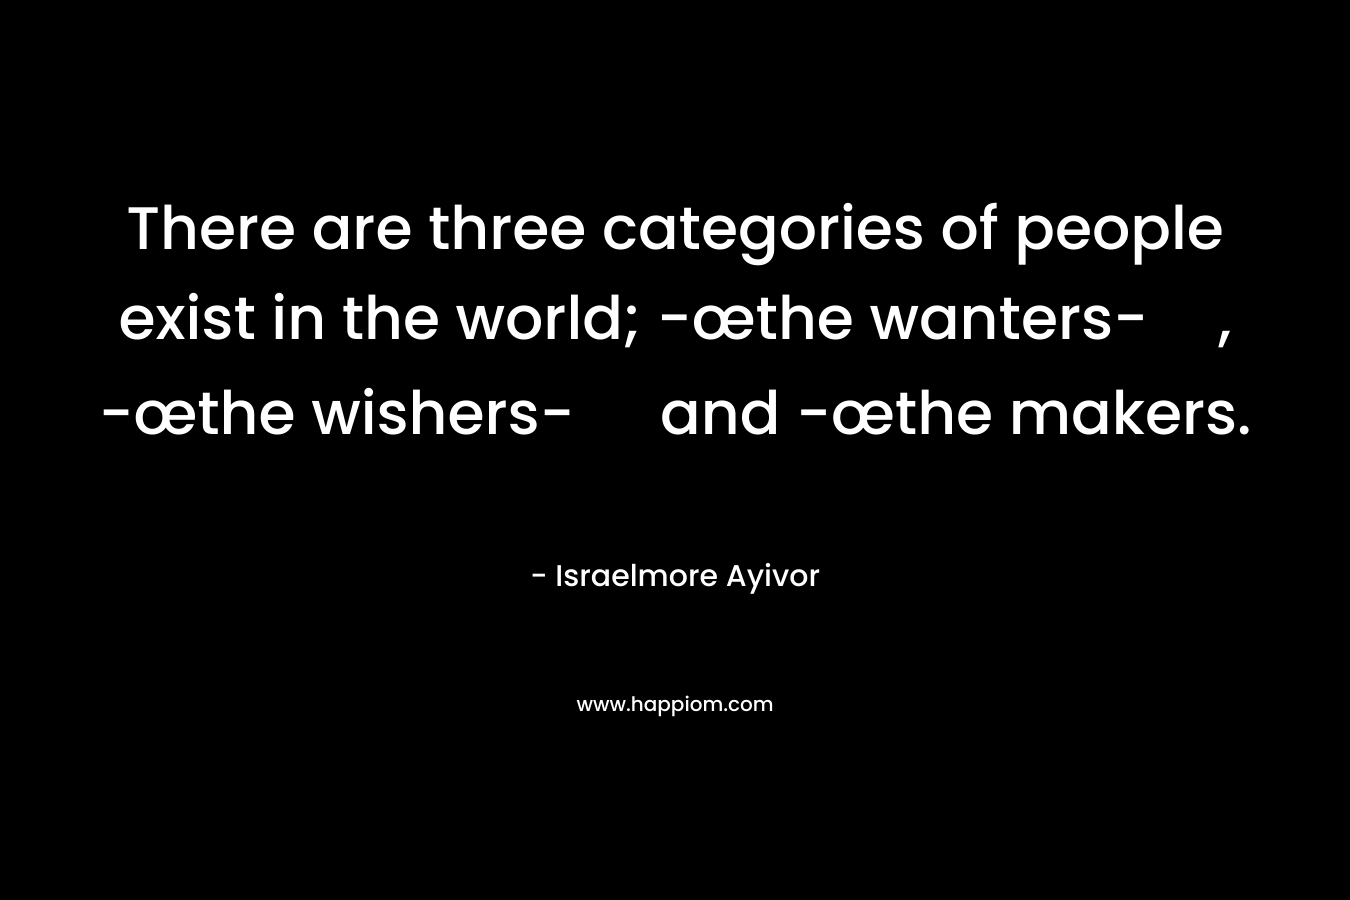 There are three categories of people exist in the world; -œthe wanters-, -œthe wishers- and -œthe makers.